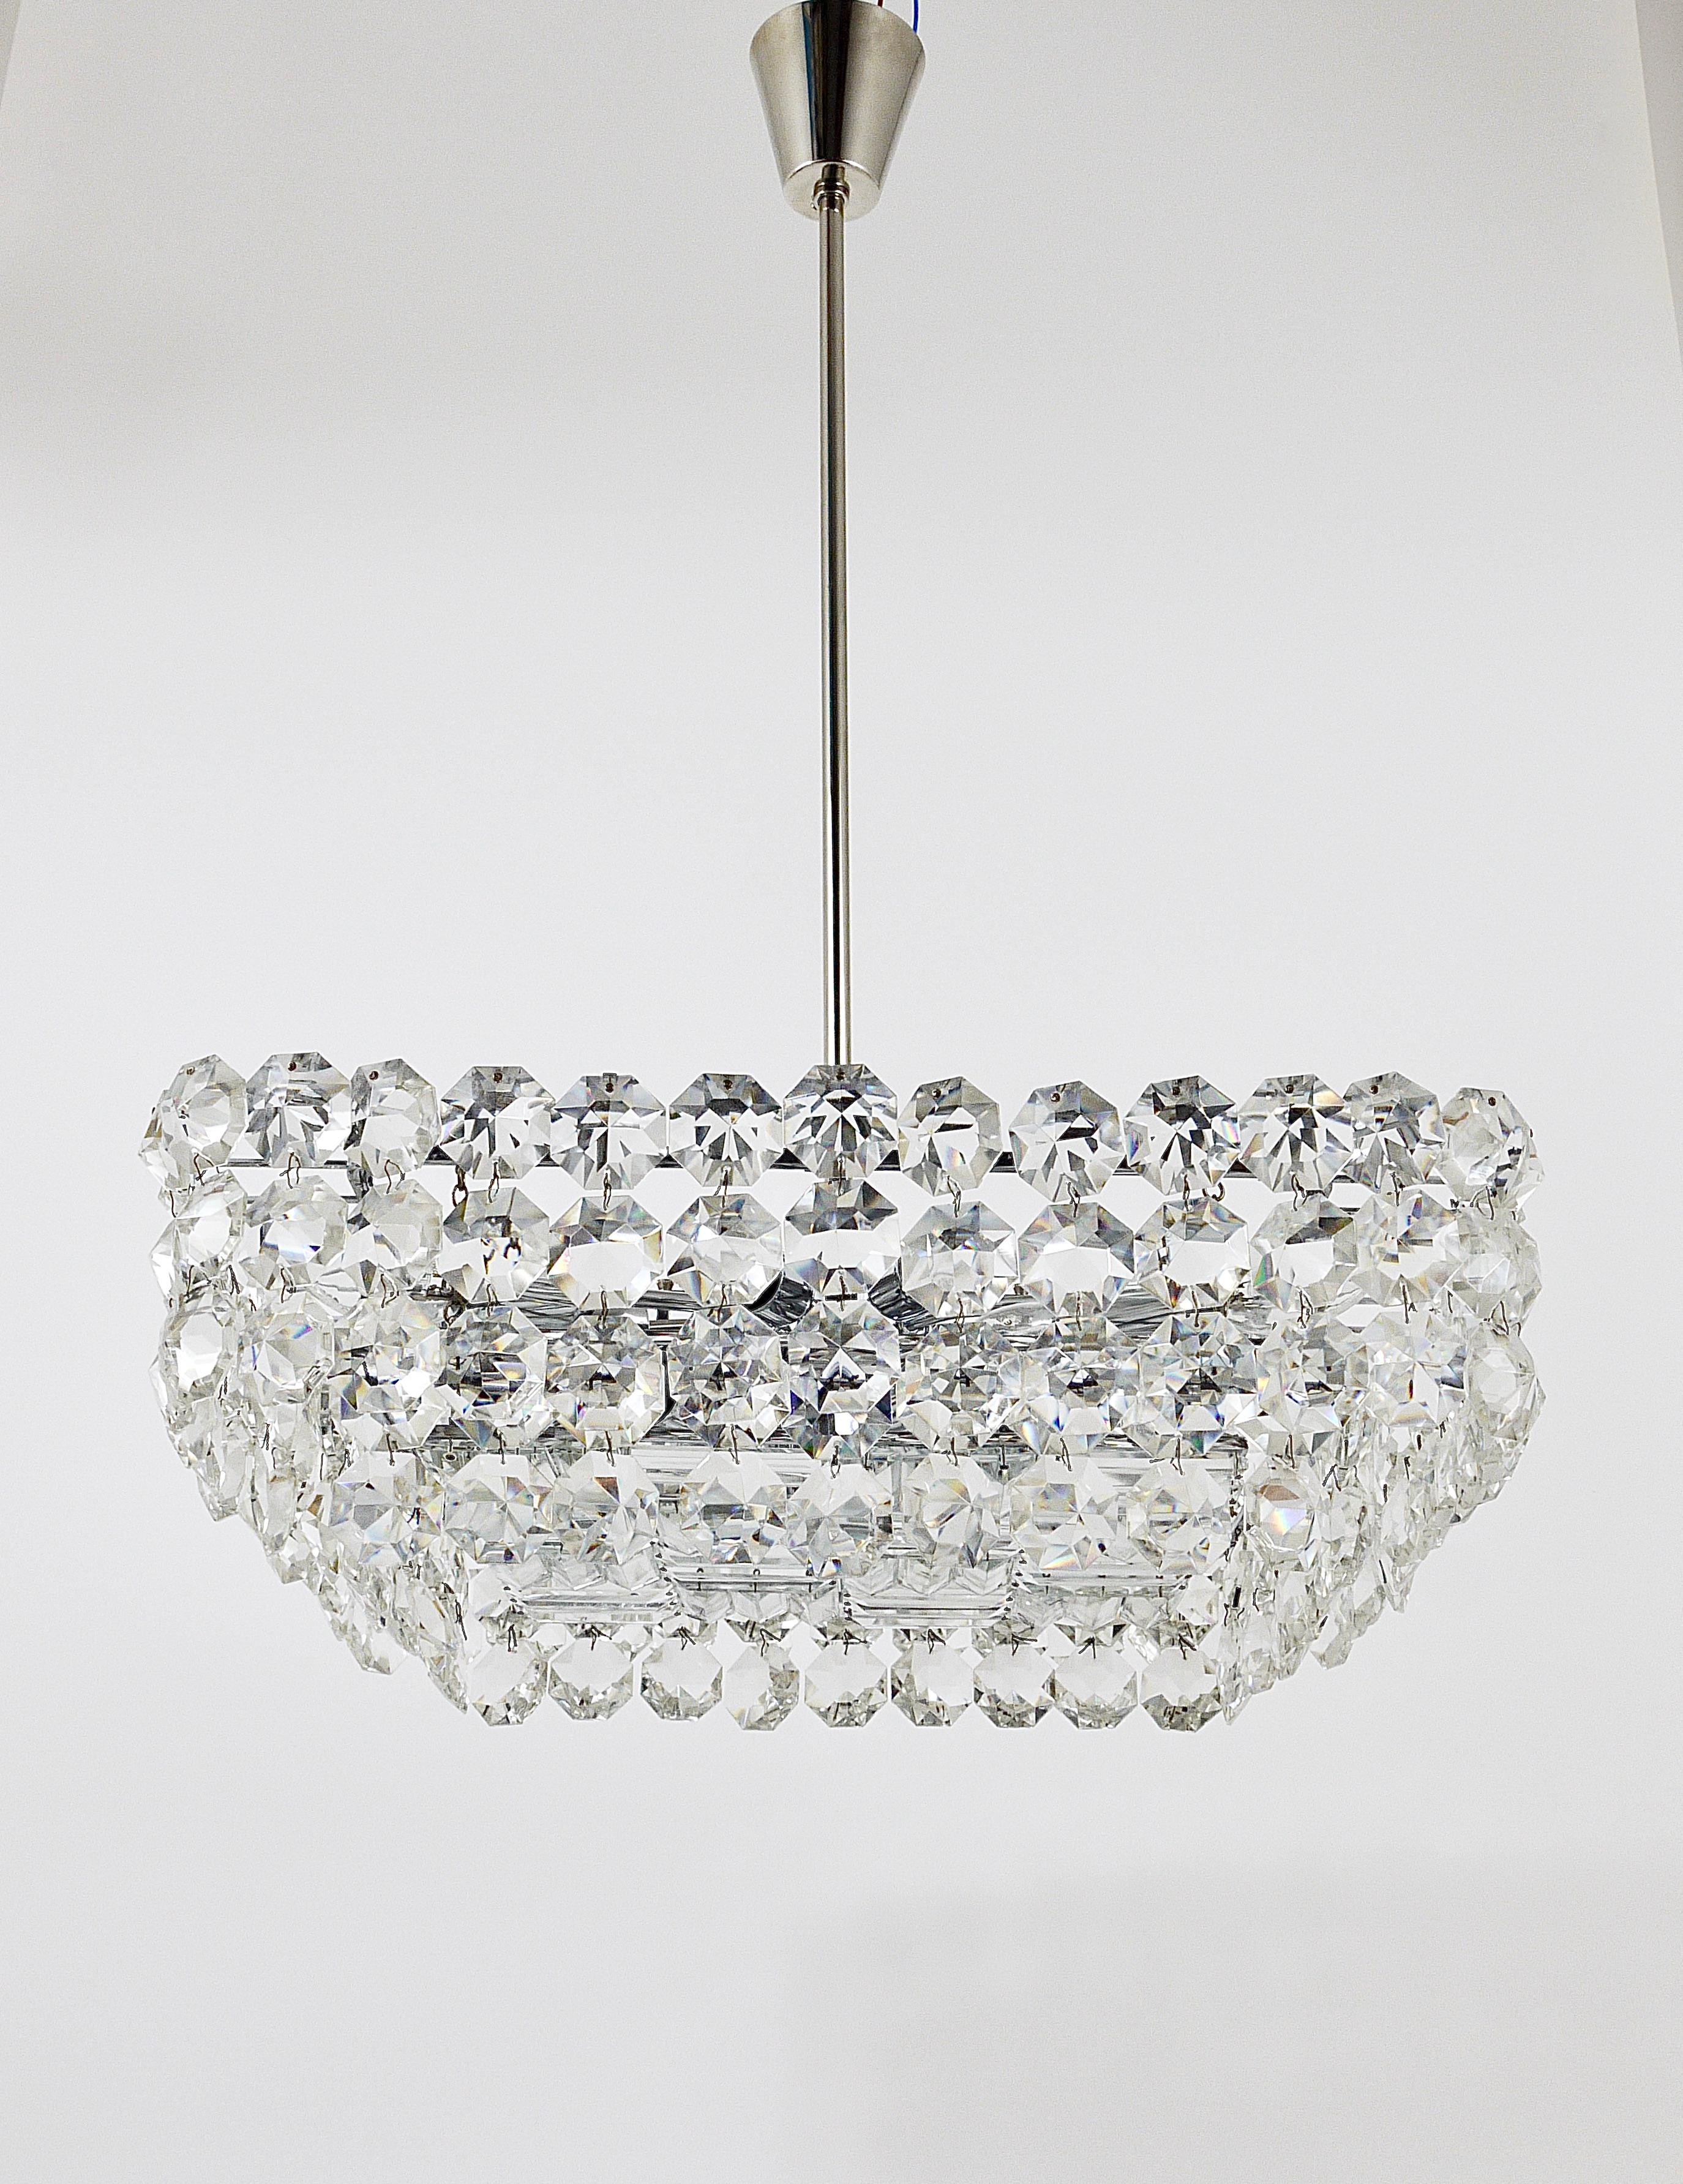 Brass Large Square Bakalowits Chandelier with Diamond-Shaped Crystals, Austria, 1950s For Sale